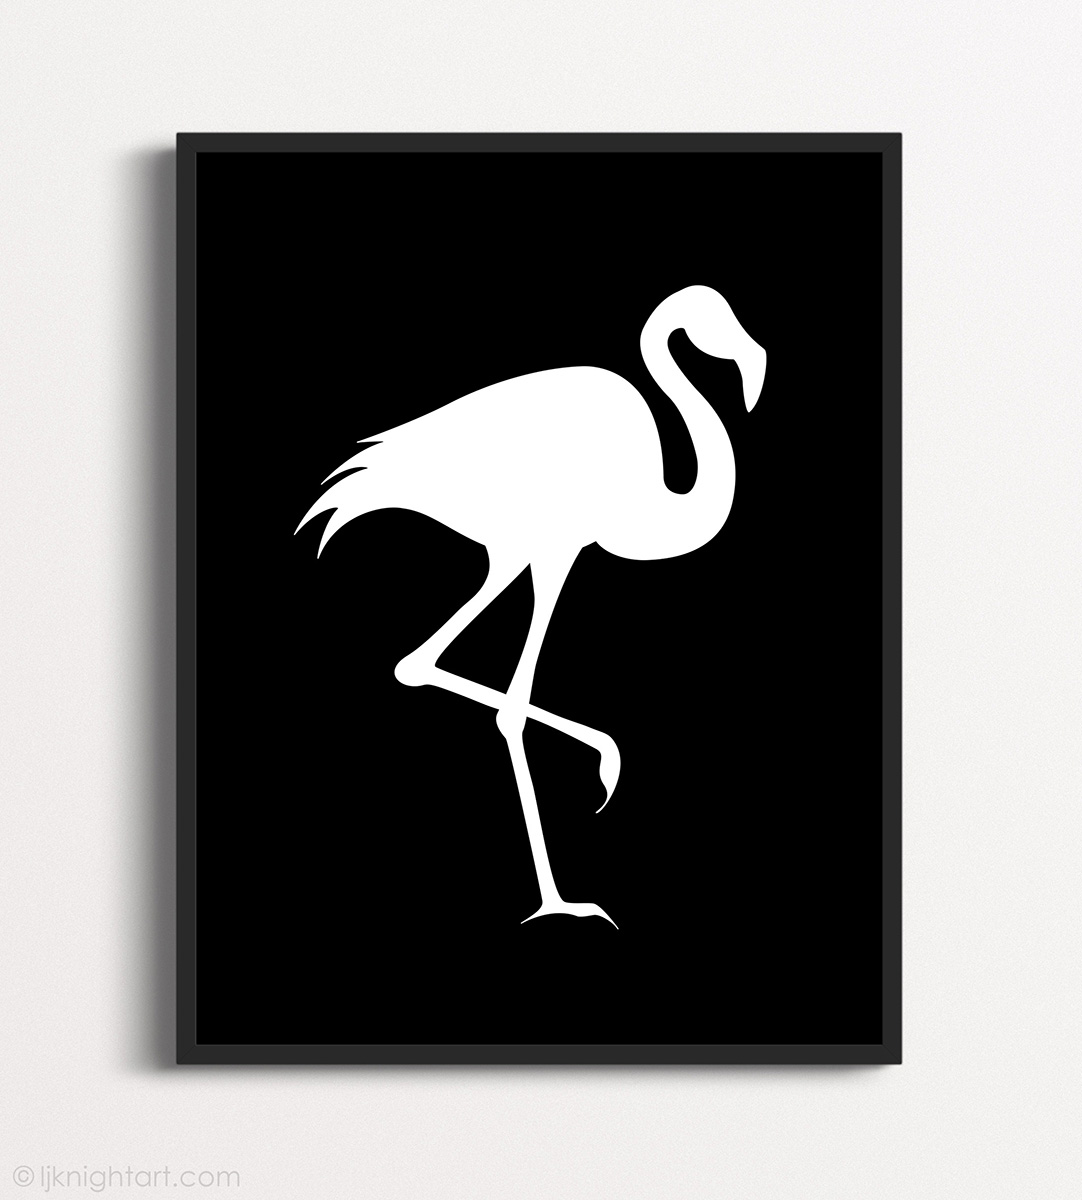 Framed bird art print  with a white flamingo silhouette on a dramatic black background